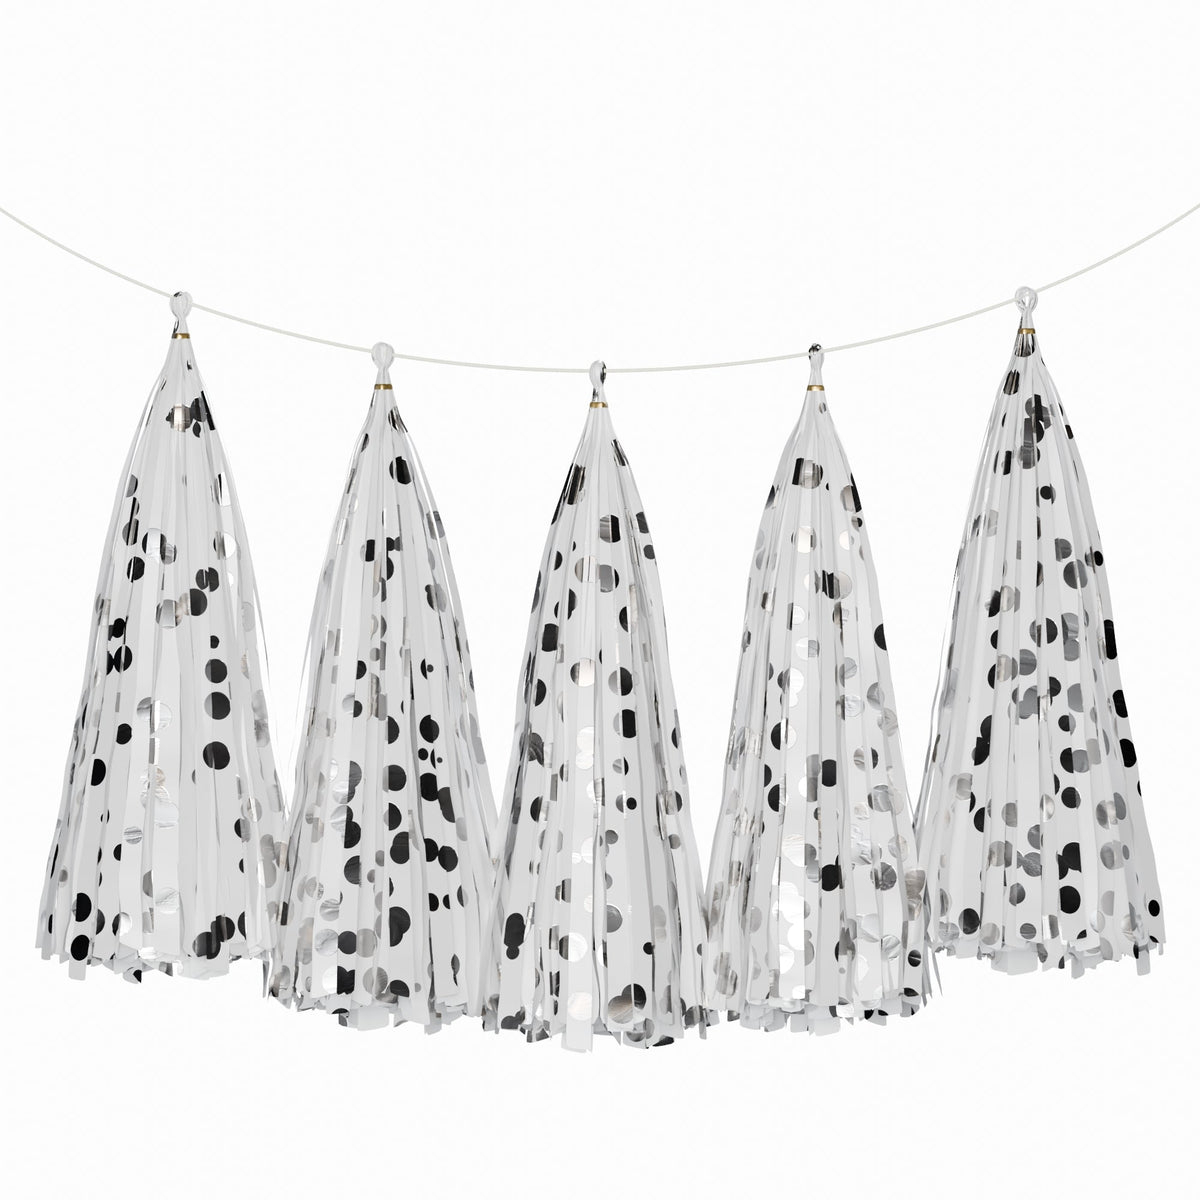 Weifang Mayshine Imp&exp co Decorations White & Silver Dots Tassel Garland, 5 Count 810064197307